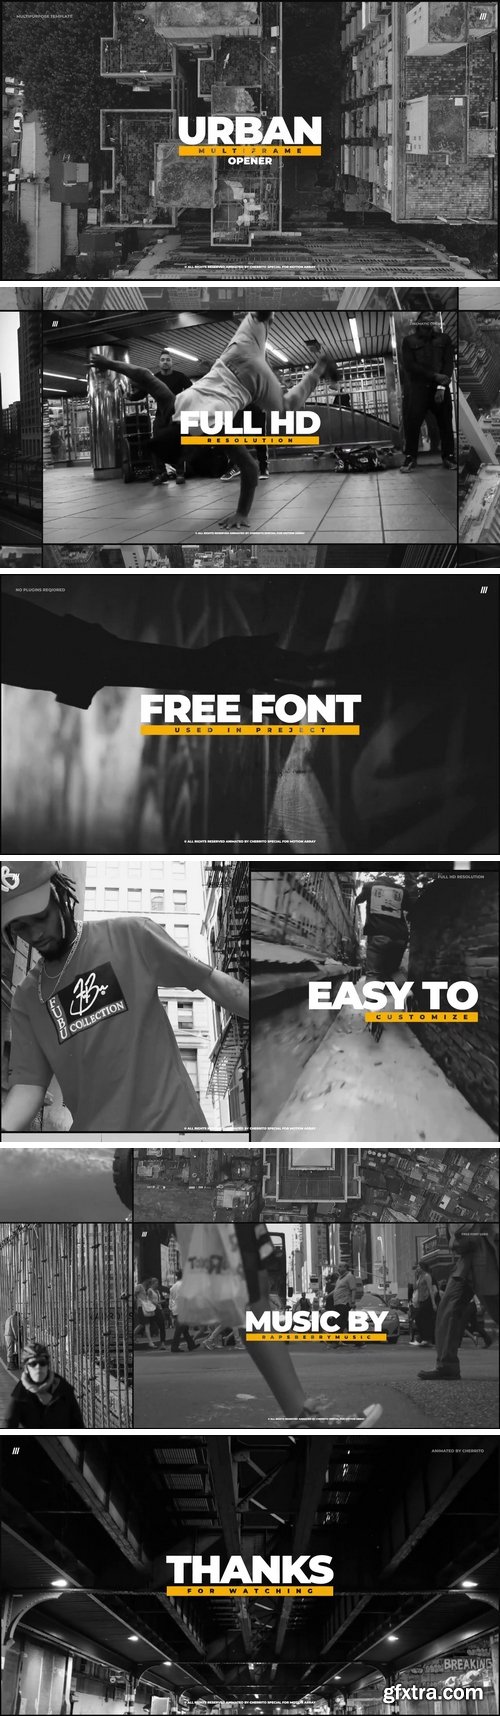 MA - Urban Multiframe Opener After Effects Templates 149125